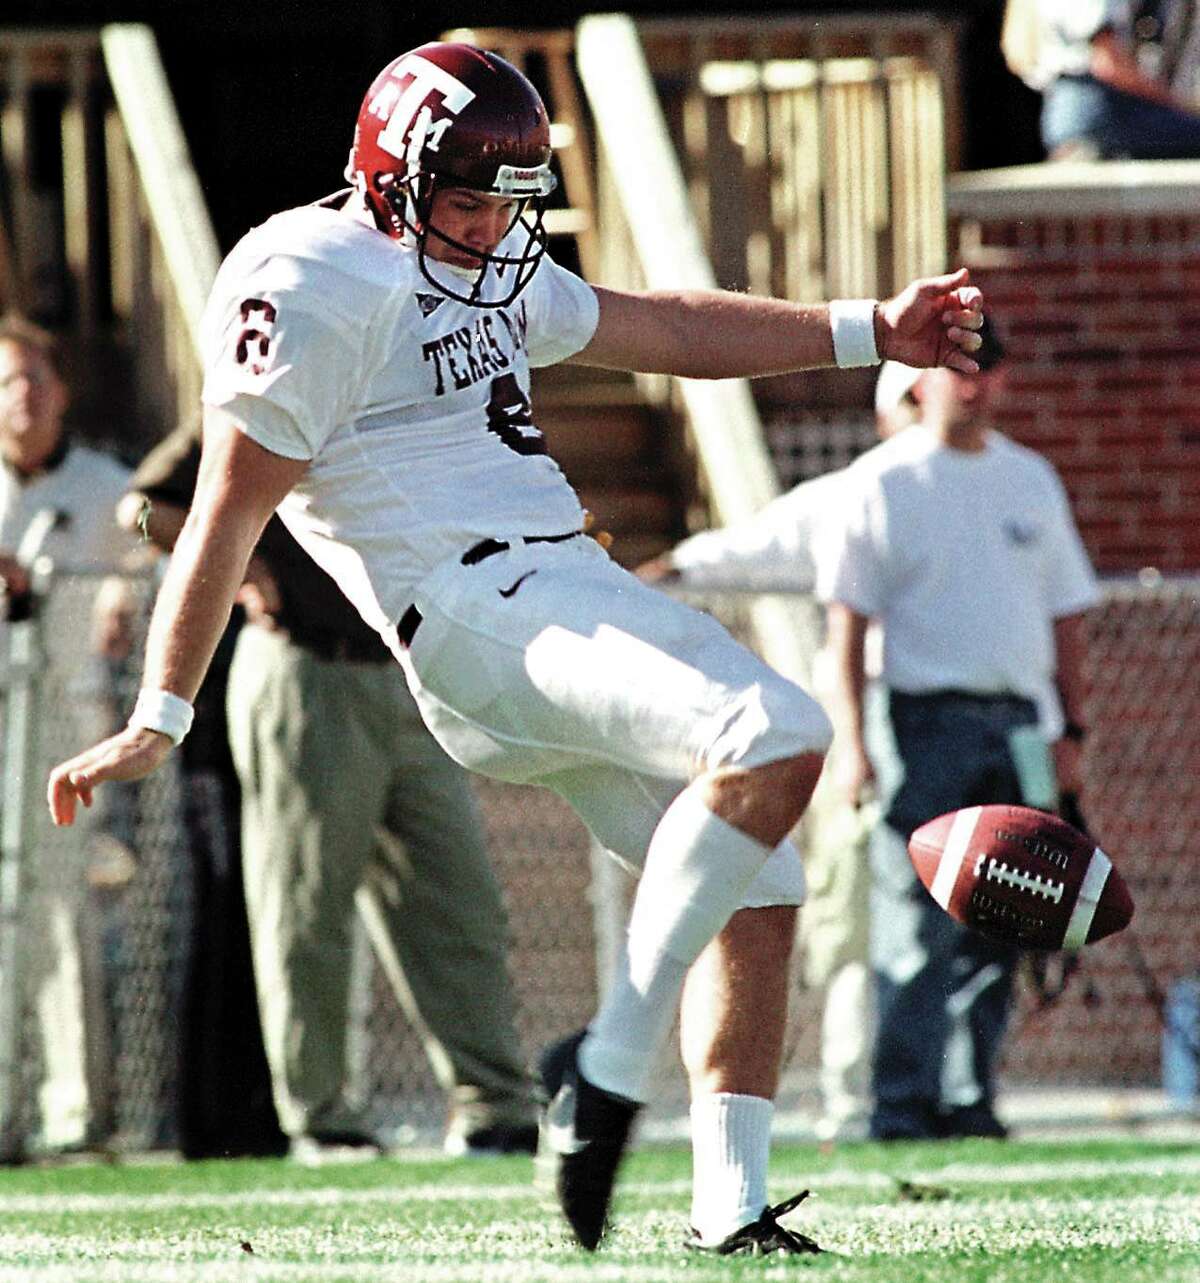 Shane Lechler, punting for Texas A&M, enjoyed a Hall of Fame worthy career with the Houston Texans.